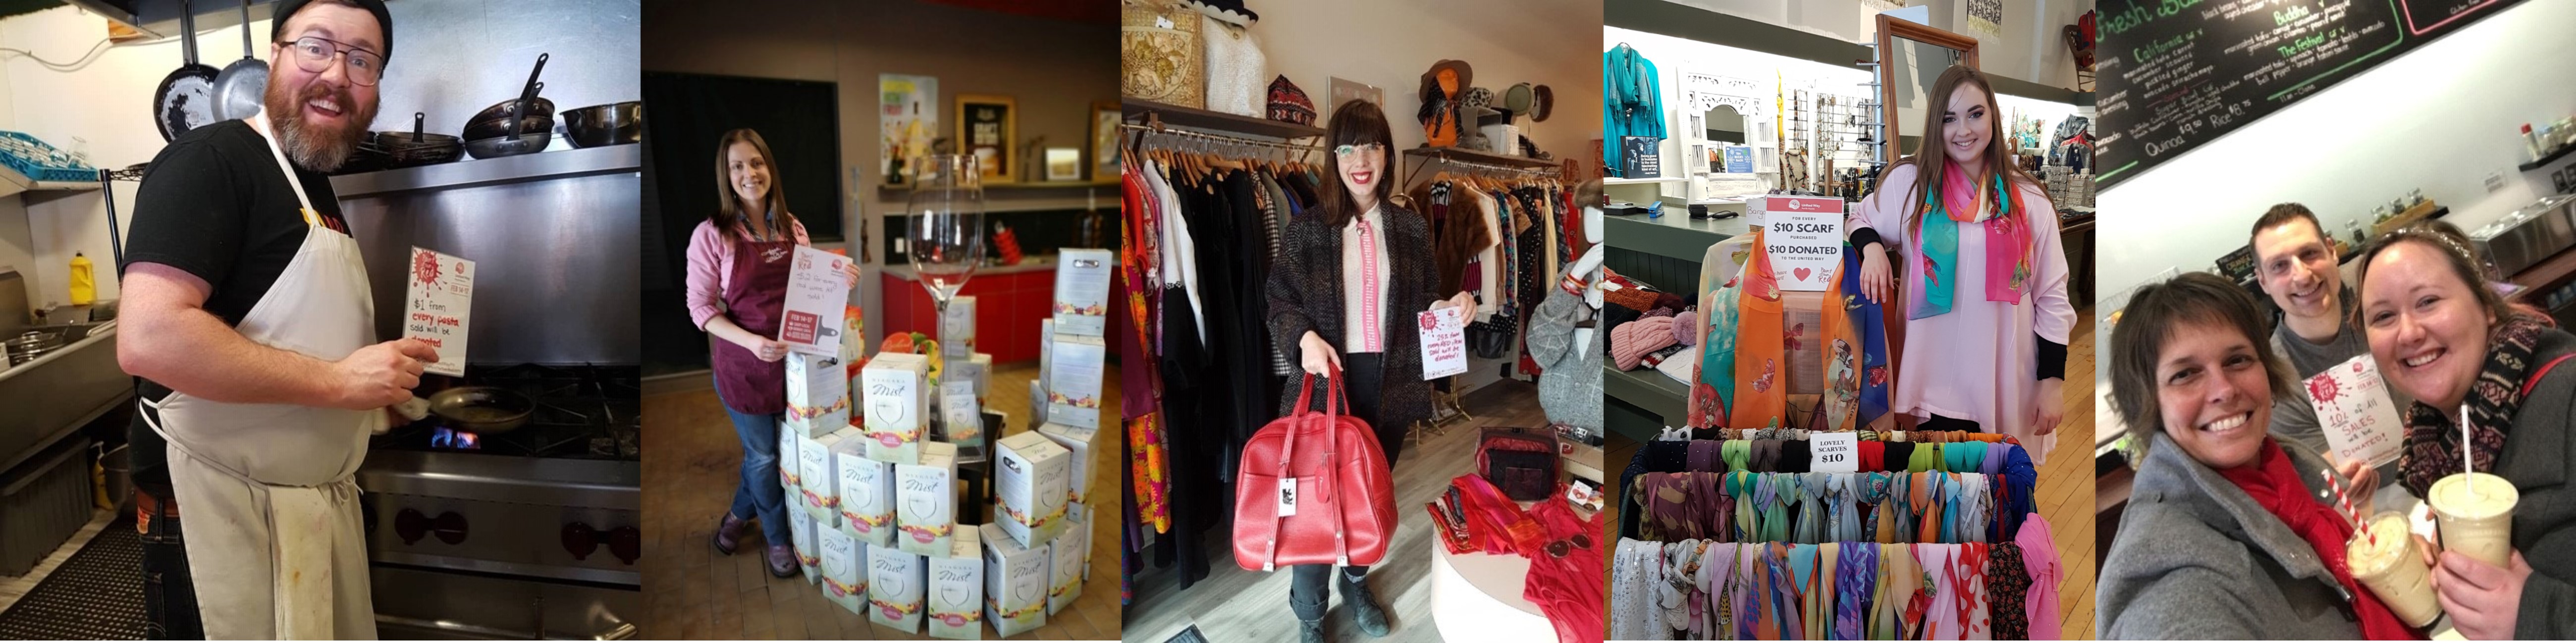 Four pictures of business merchants standing with their products demonstrating their promotion for the event; Paint the Town Red